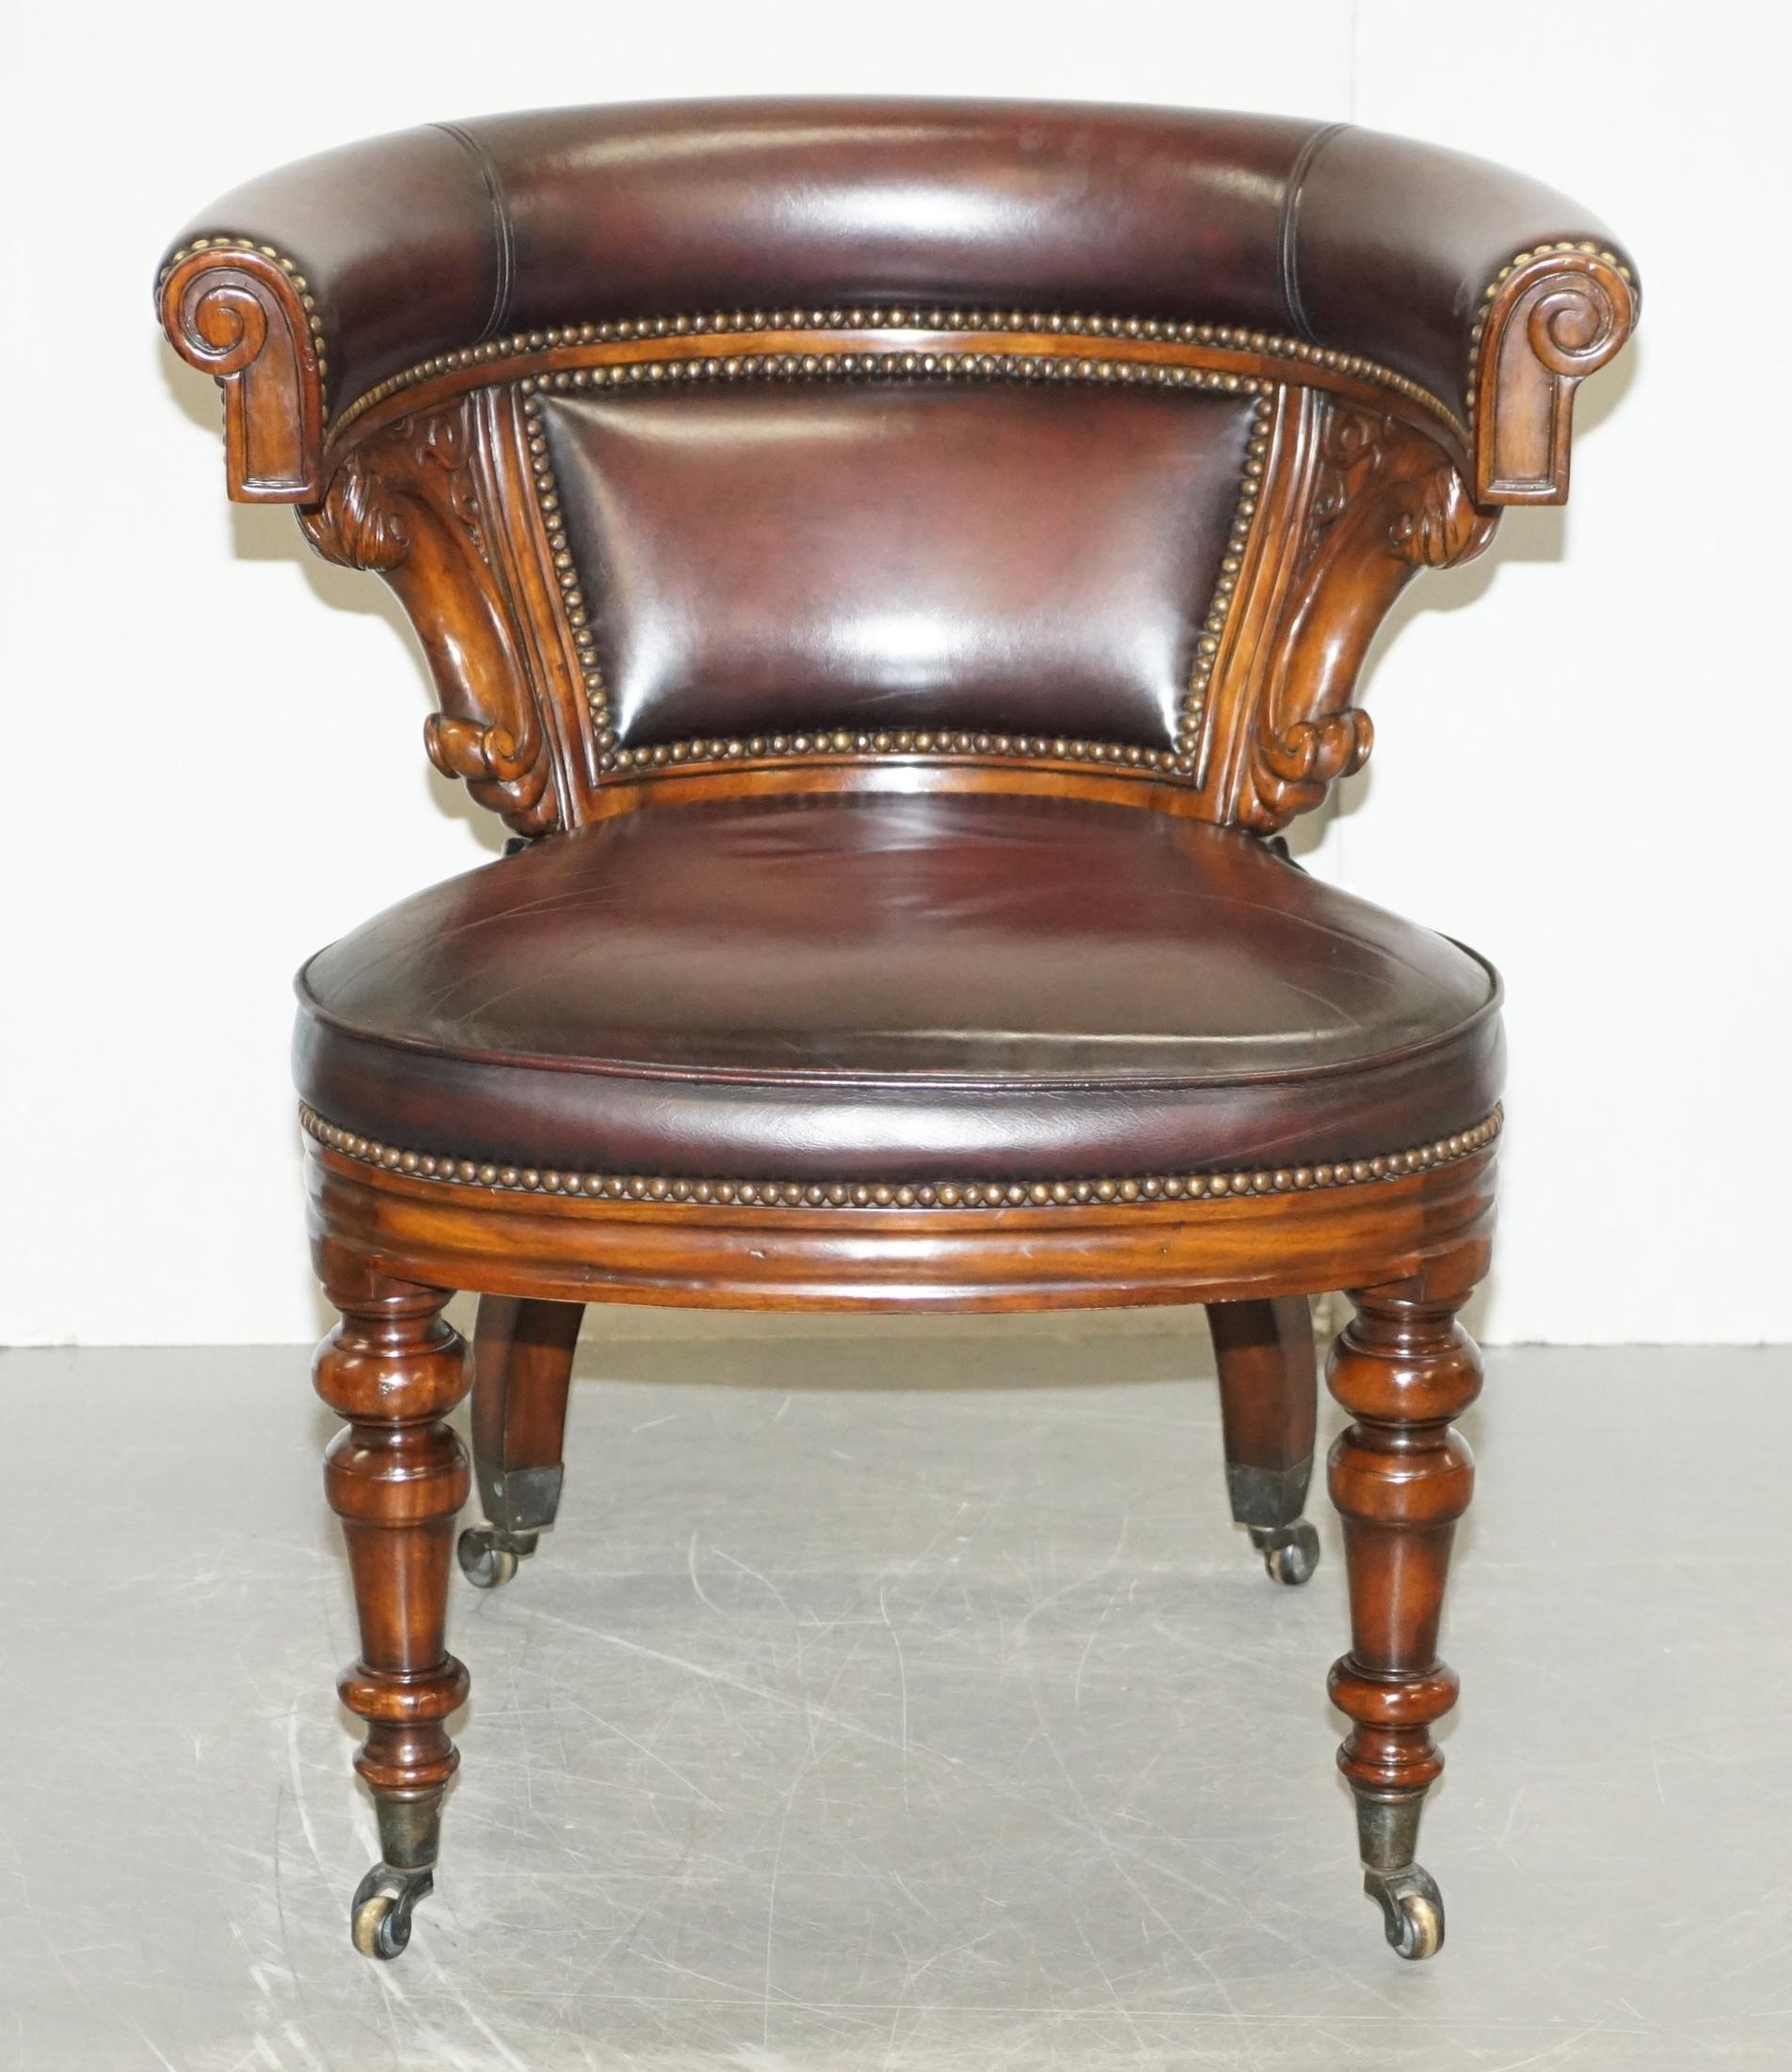 We are delighted to offer this lovely Theodore Alexander Oxblood leather horseshoe shaped directors office chair

A very well made decorative and comfortable chair, it looks amazing from every angle, the timber patina is sublime as is the quality